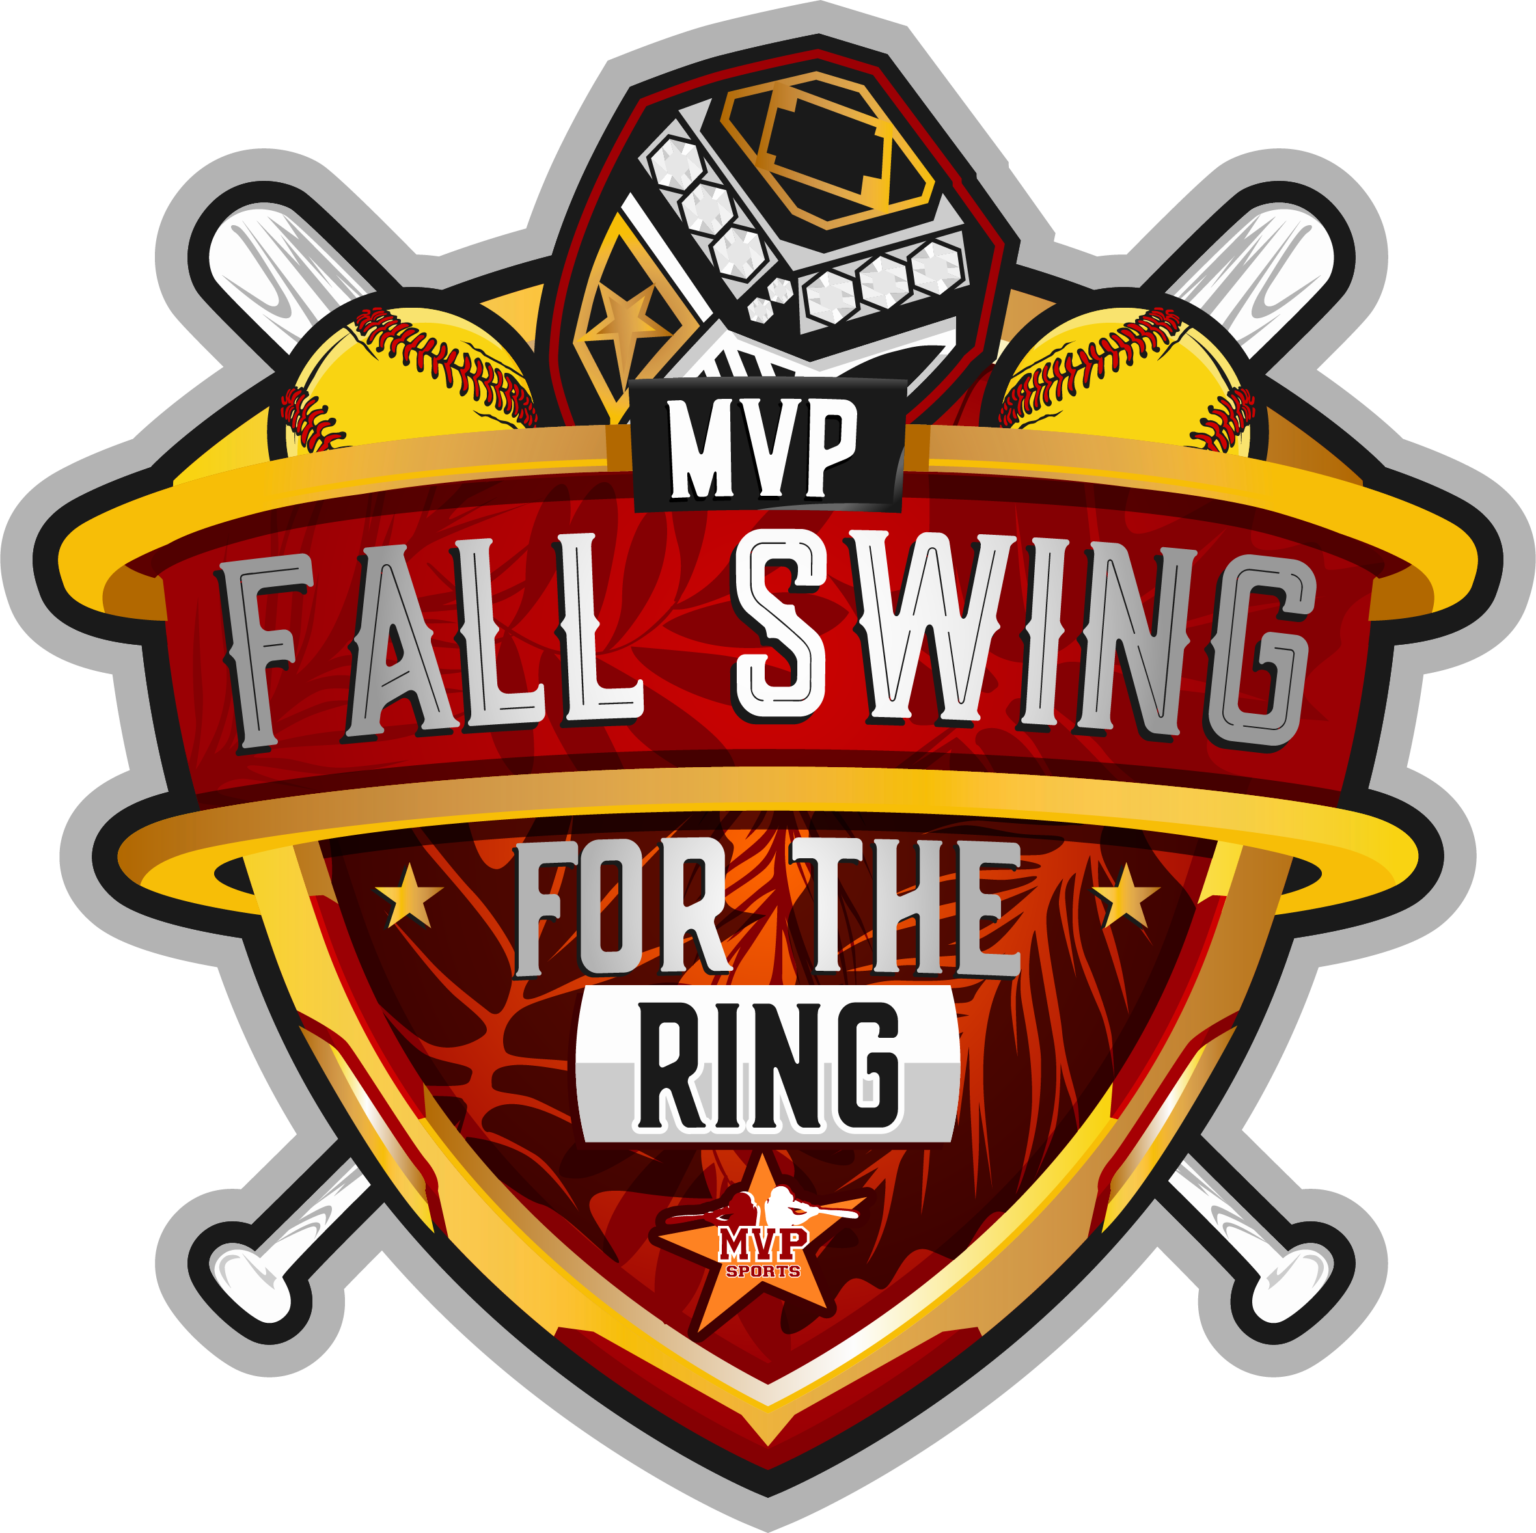 “C” FALL SWING FOR THE RING AT CALHOUN COUNTY *****CHAMPIONSHIP RINGS